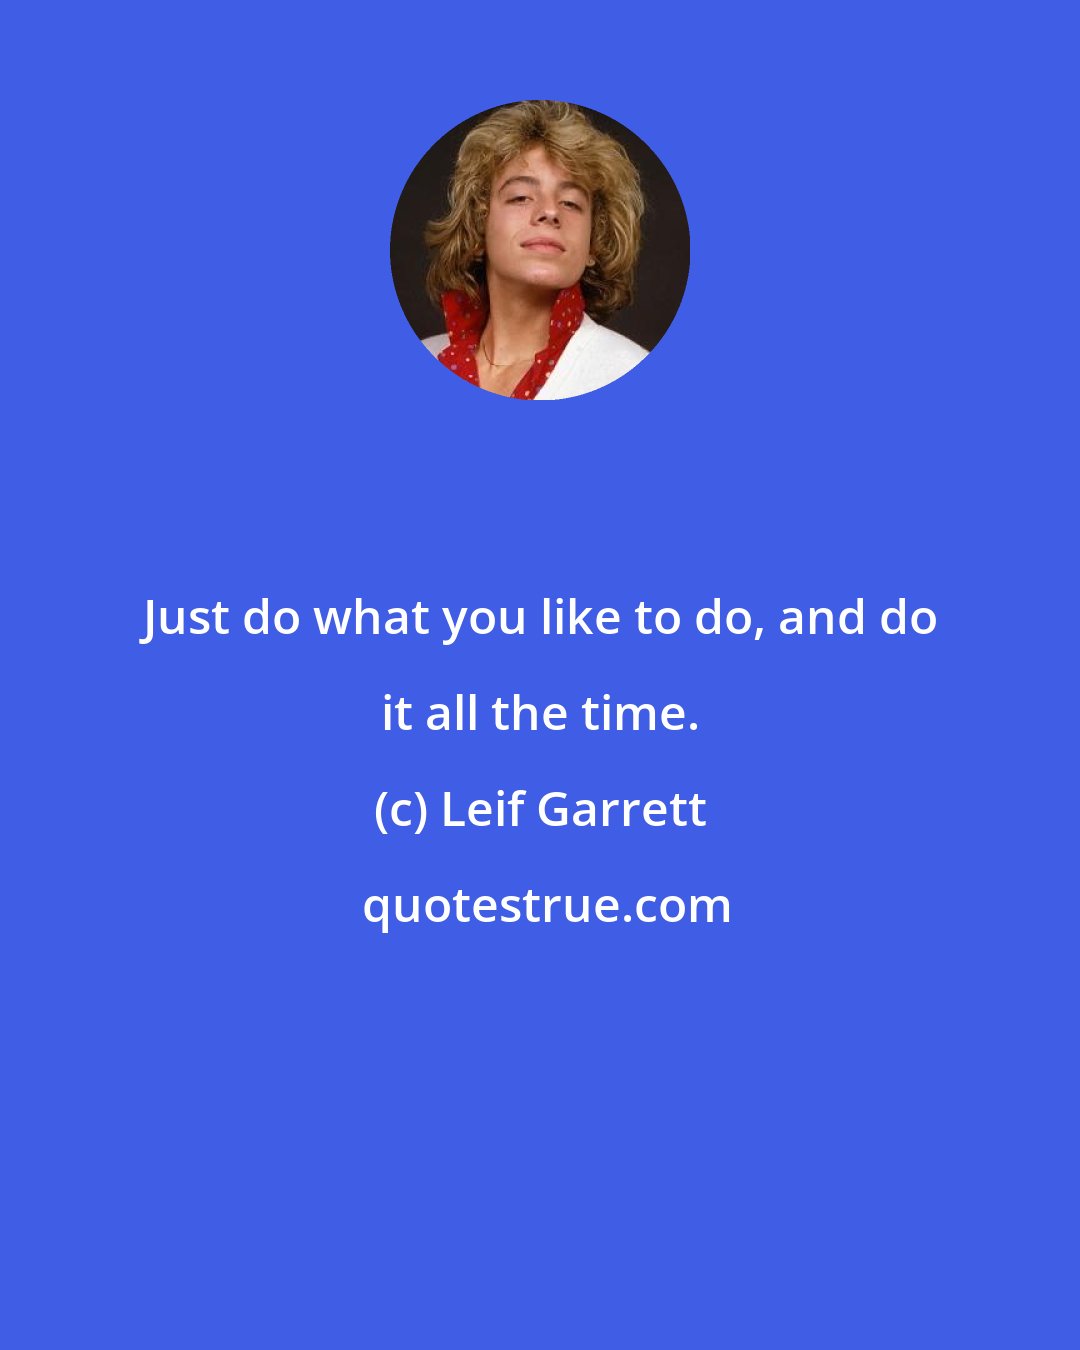 Leif Garrett: Just do what you like to do, and do it all the time.